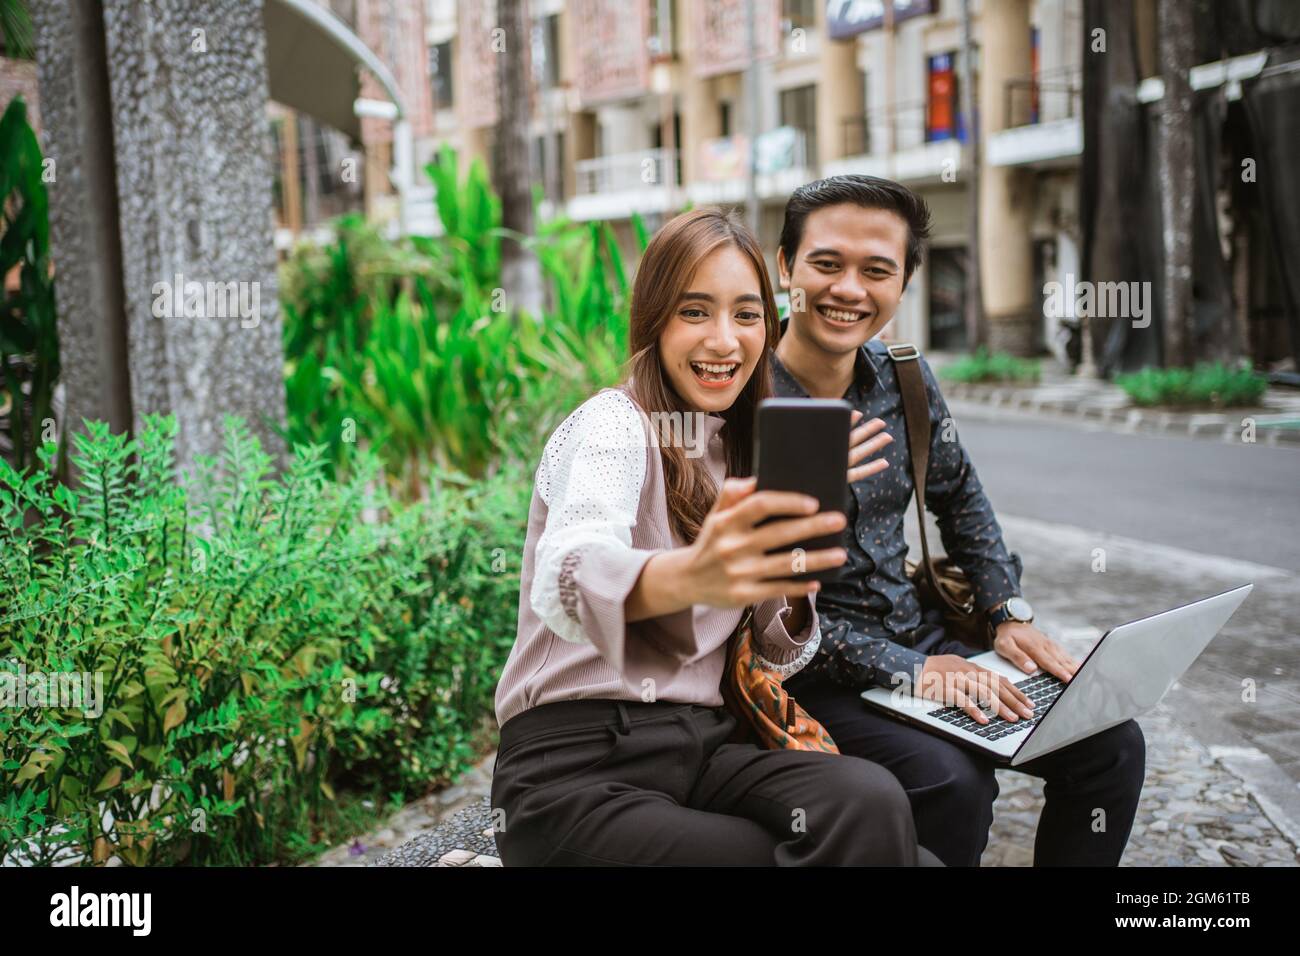 Happy woman using a smart phone taking selfie and video call with her partner Stock Photo